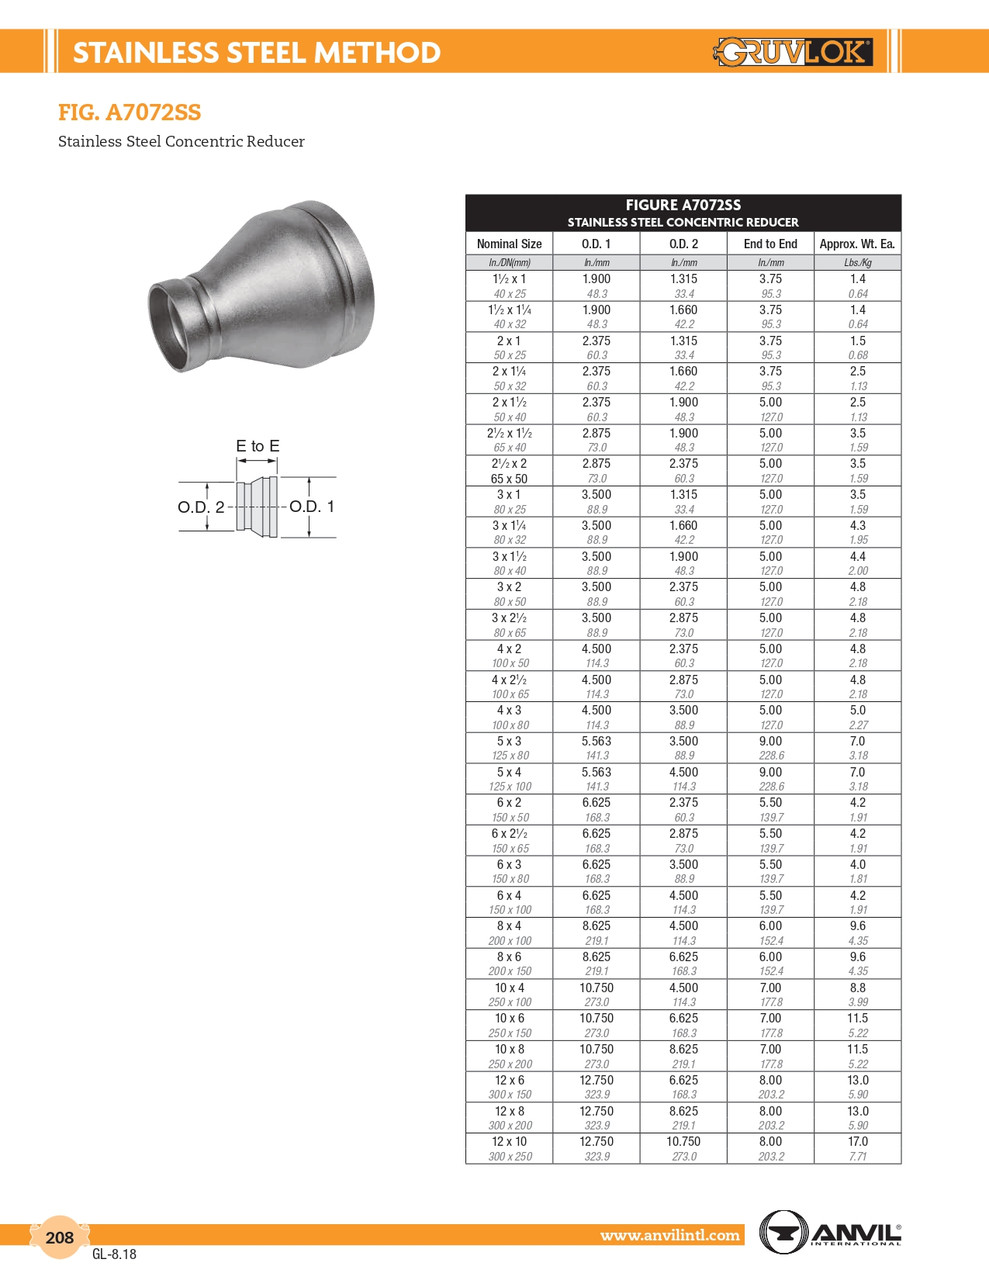 Fig. A7072SS Stainless Concentric Reducer 10 x 8"